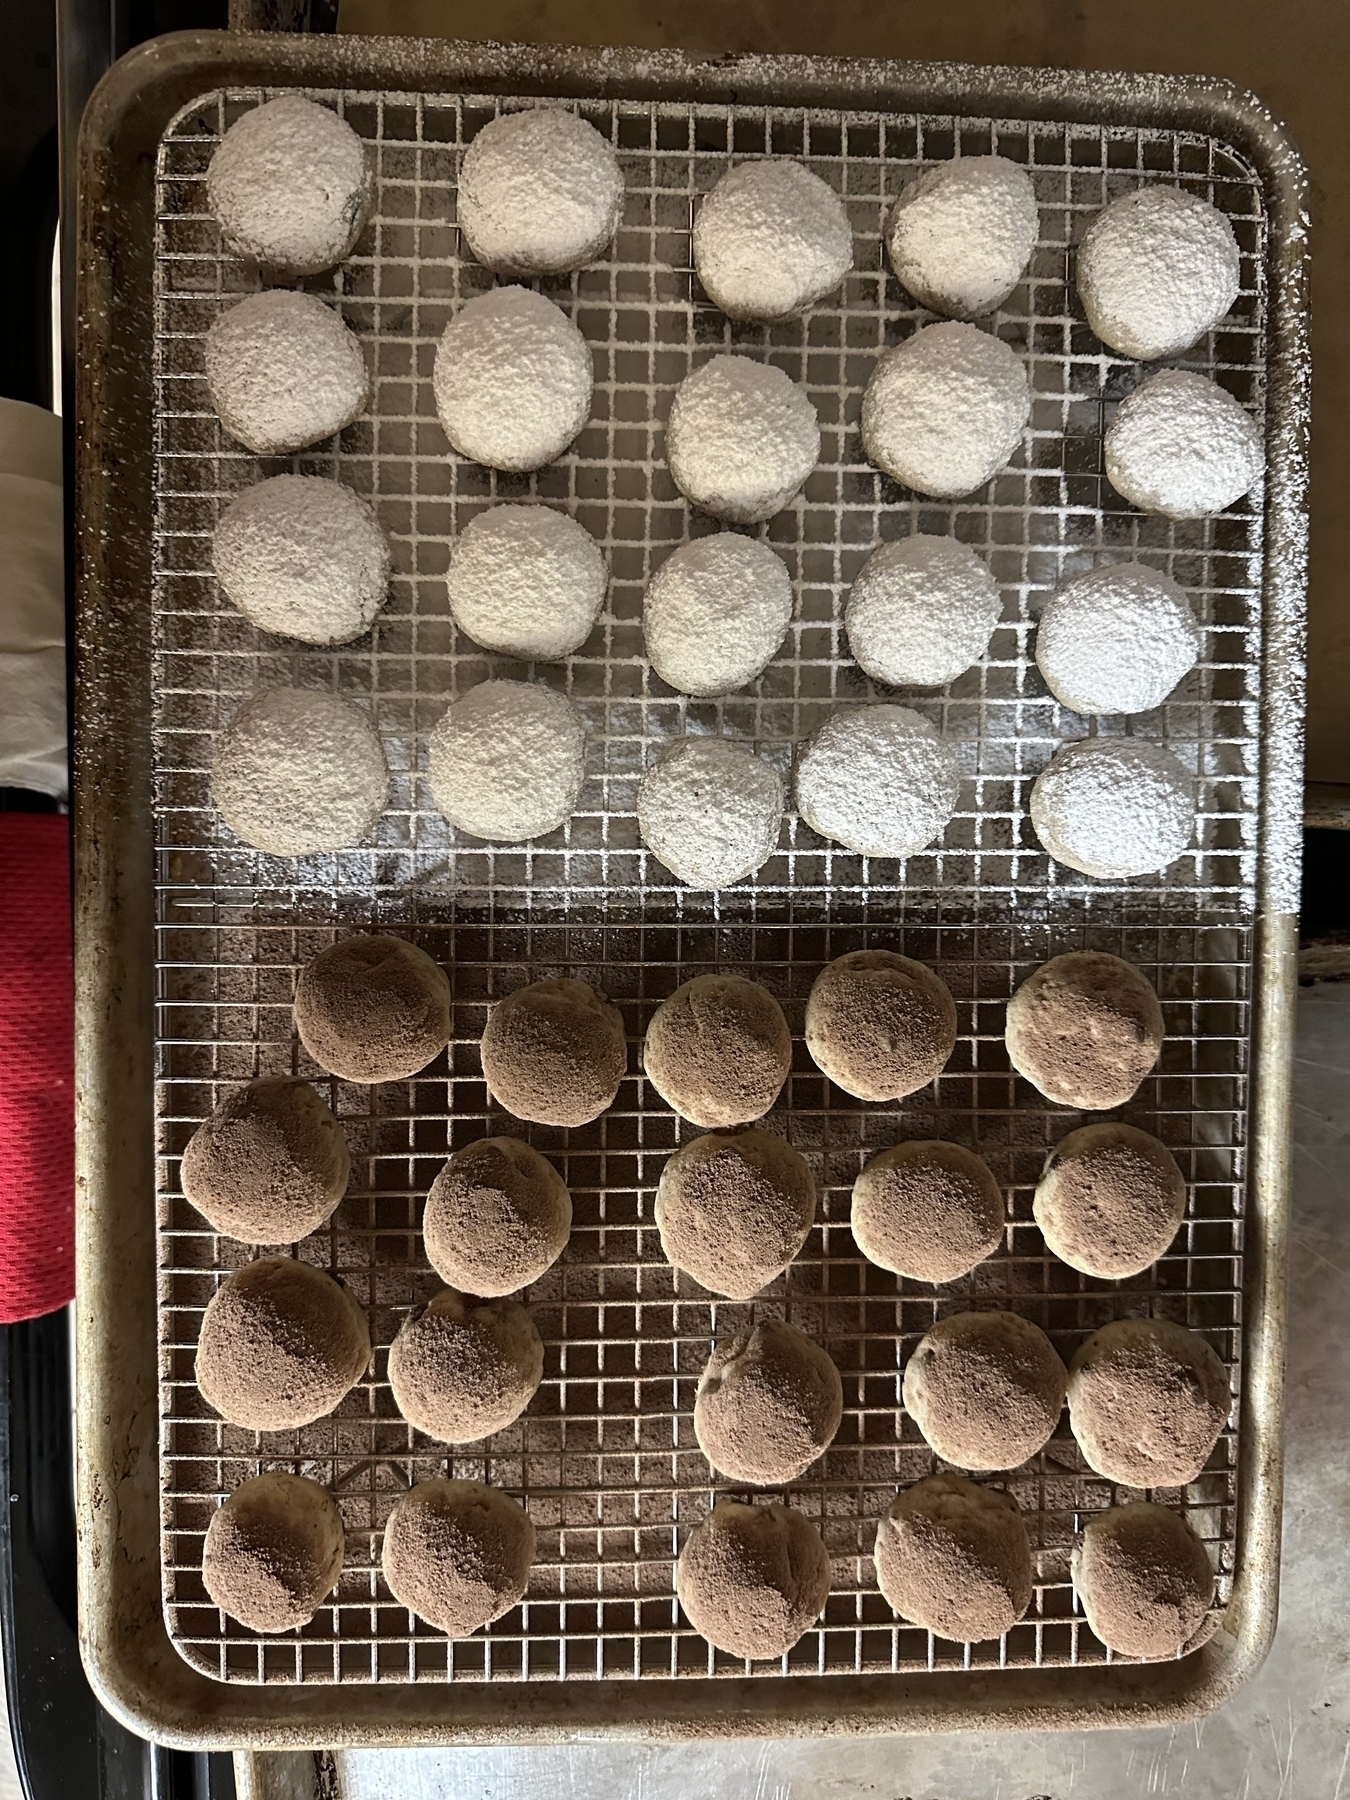 Tray full of round cookies, half covered in powdered sugar and half in chocolate powder.